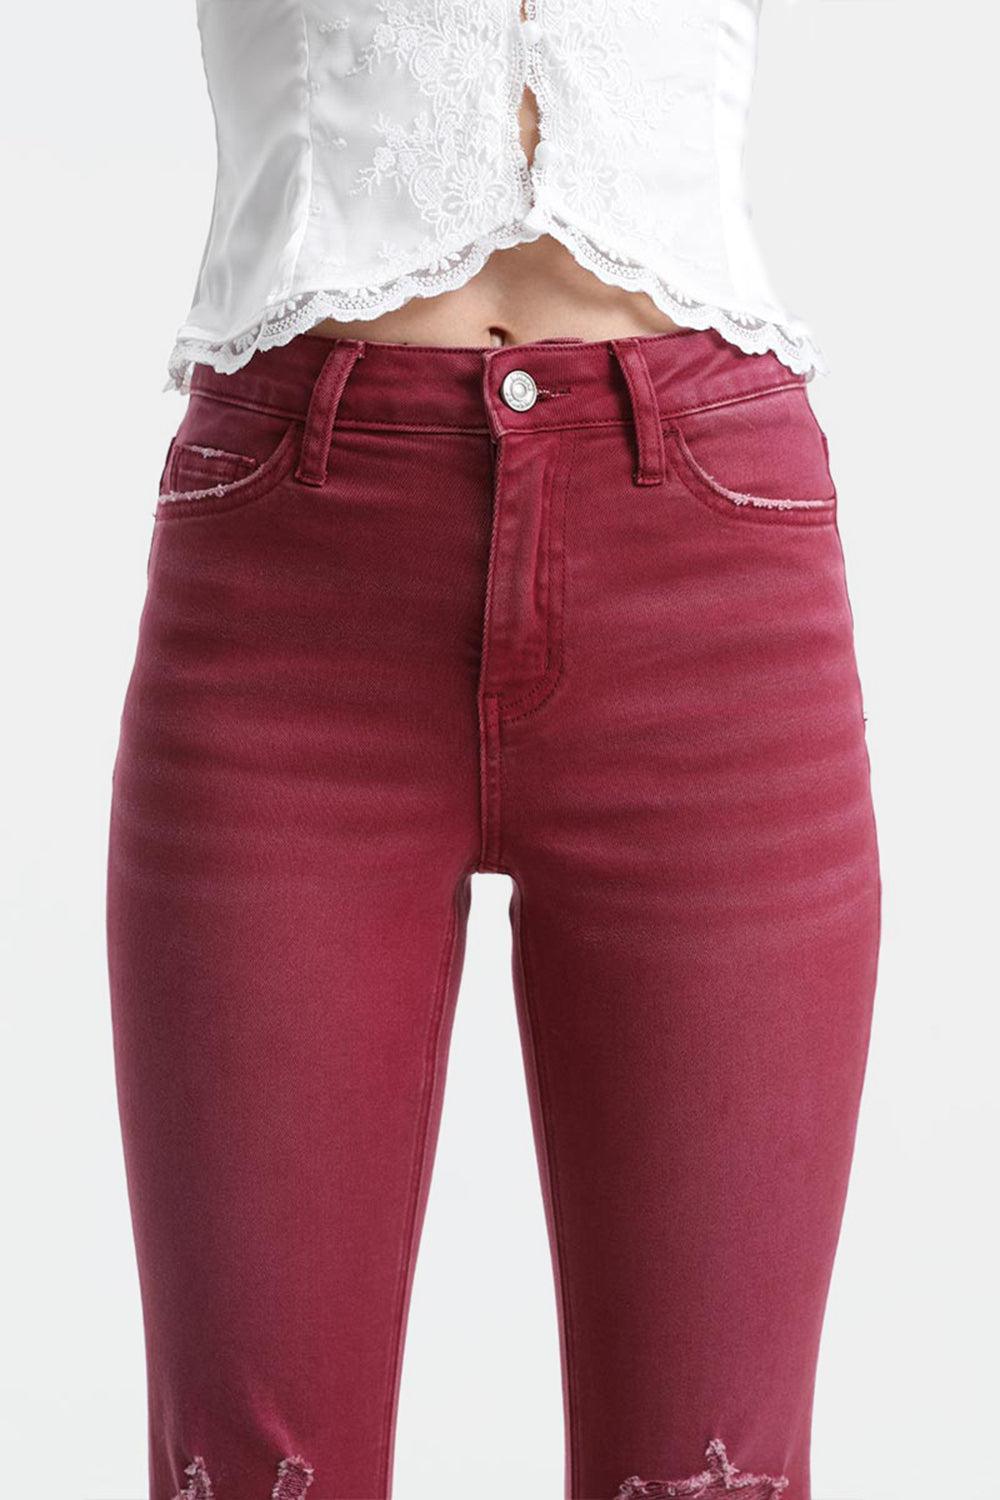 a woman wearing red jeans and a white top